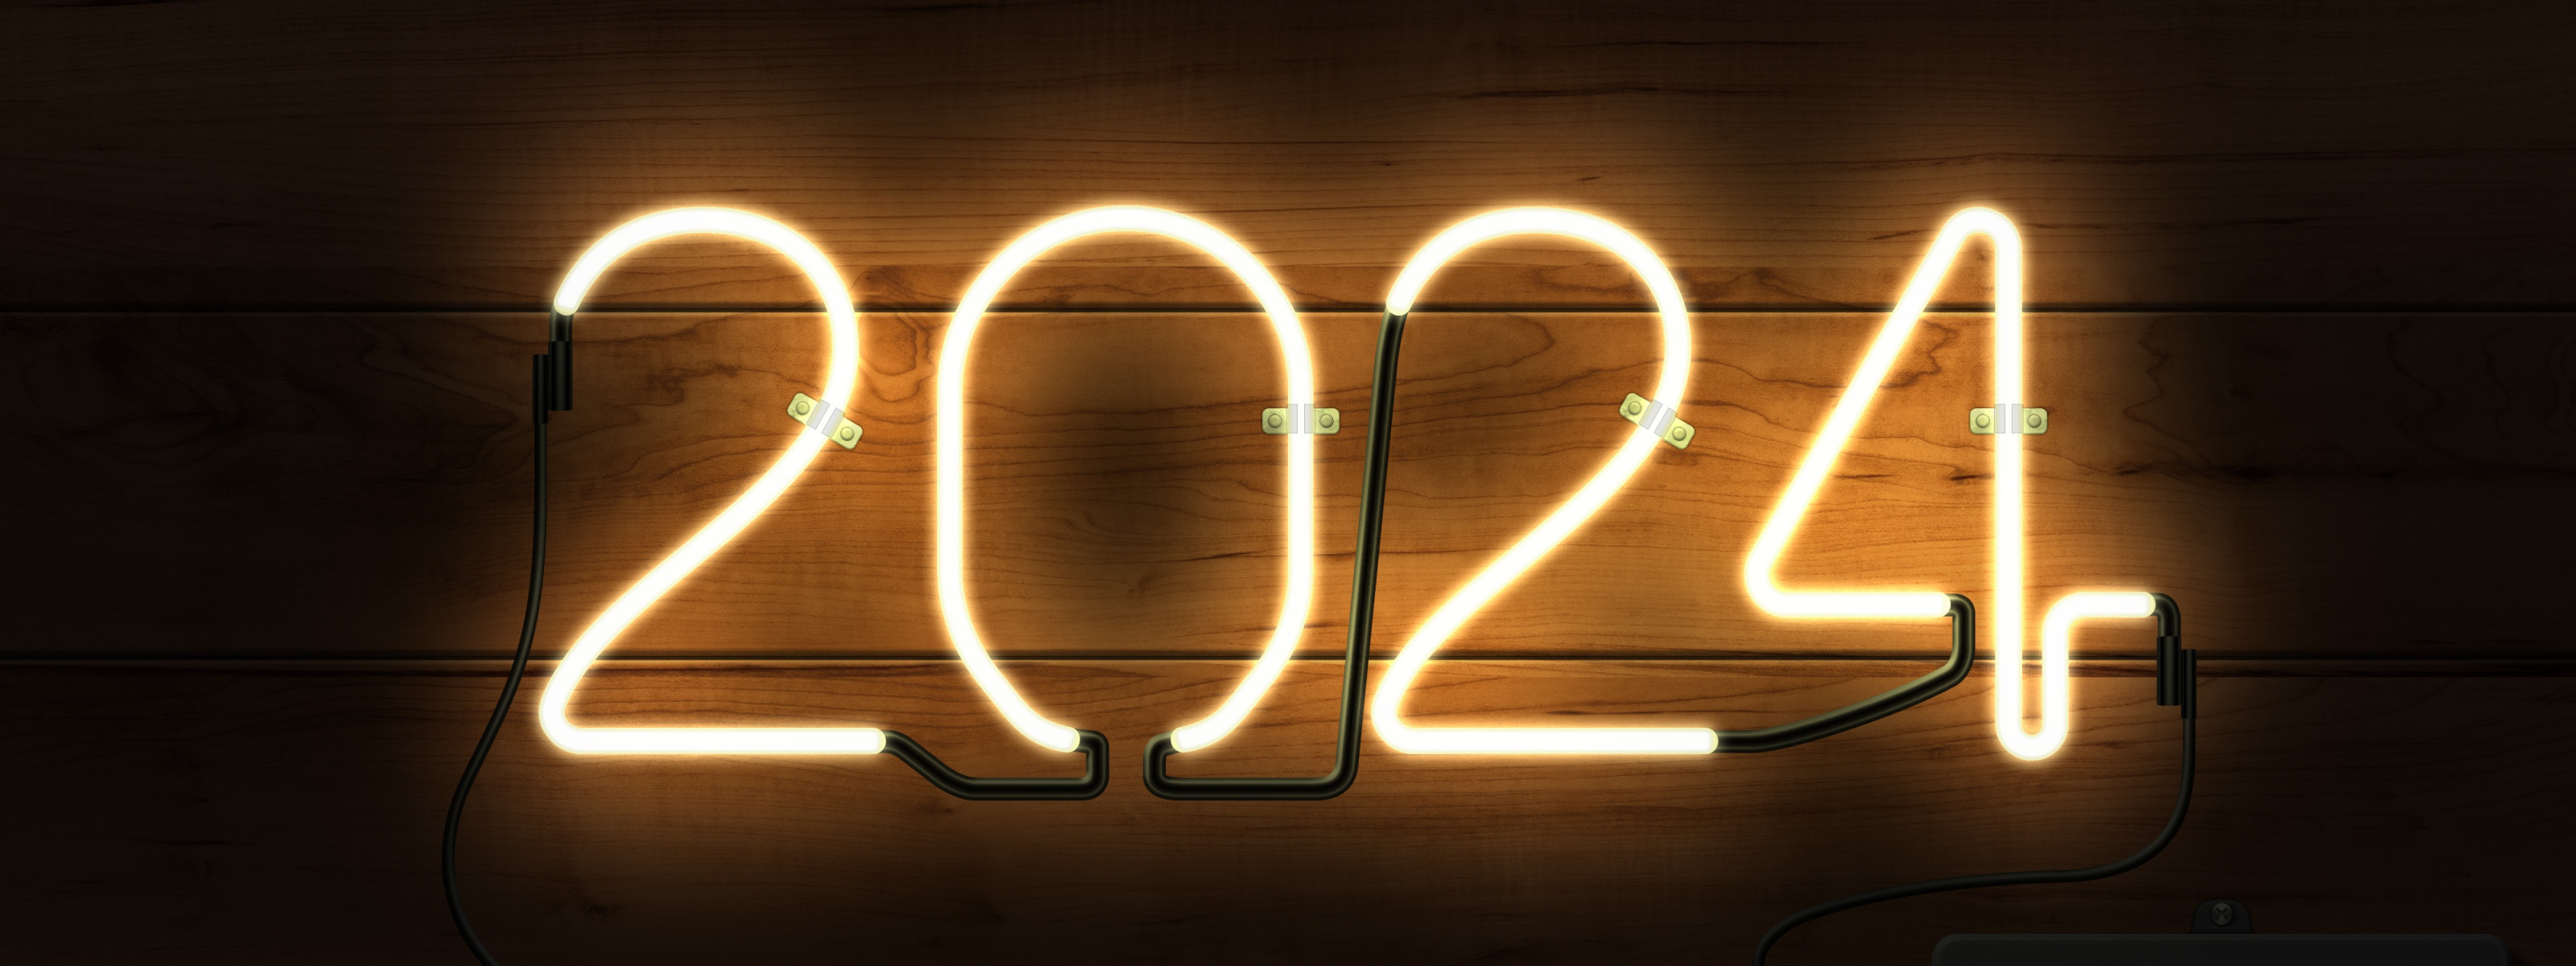 Download wallpaper new year, neon, happy new year, neon sign, 2024year, 2024 year, section new year / christmas in resolution 3200x1200